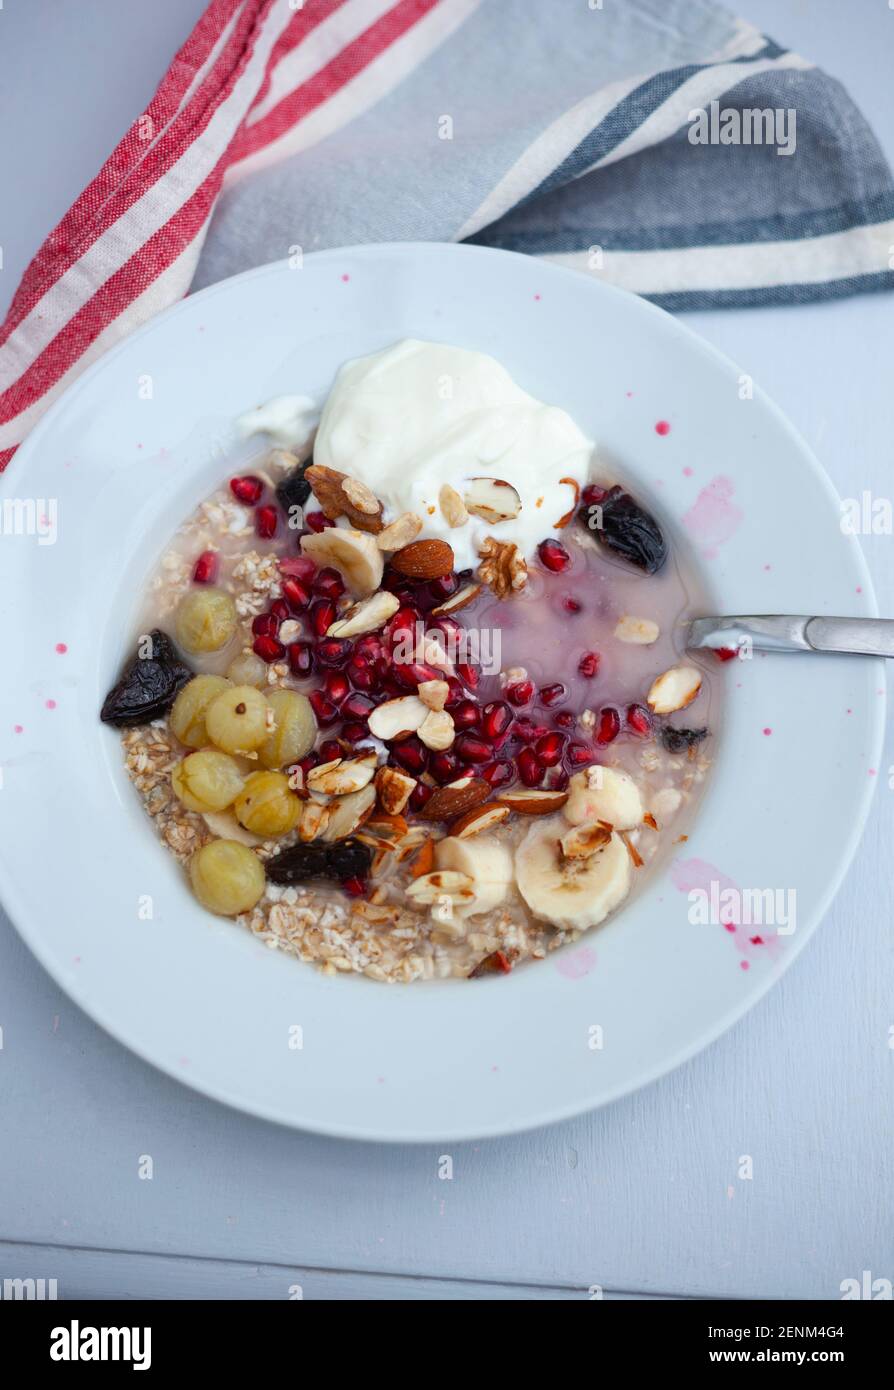 Bowl of meusli, nuts and fruit including pomegranates, banana slices,fat free yoghurt and gooseberries Stock Photo